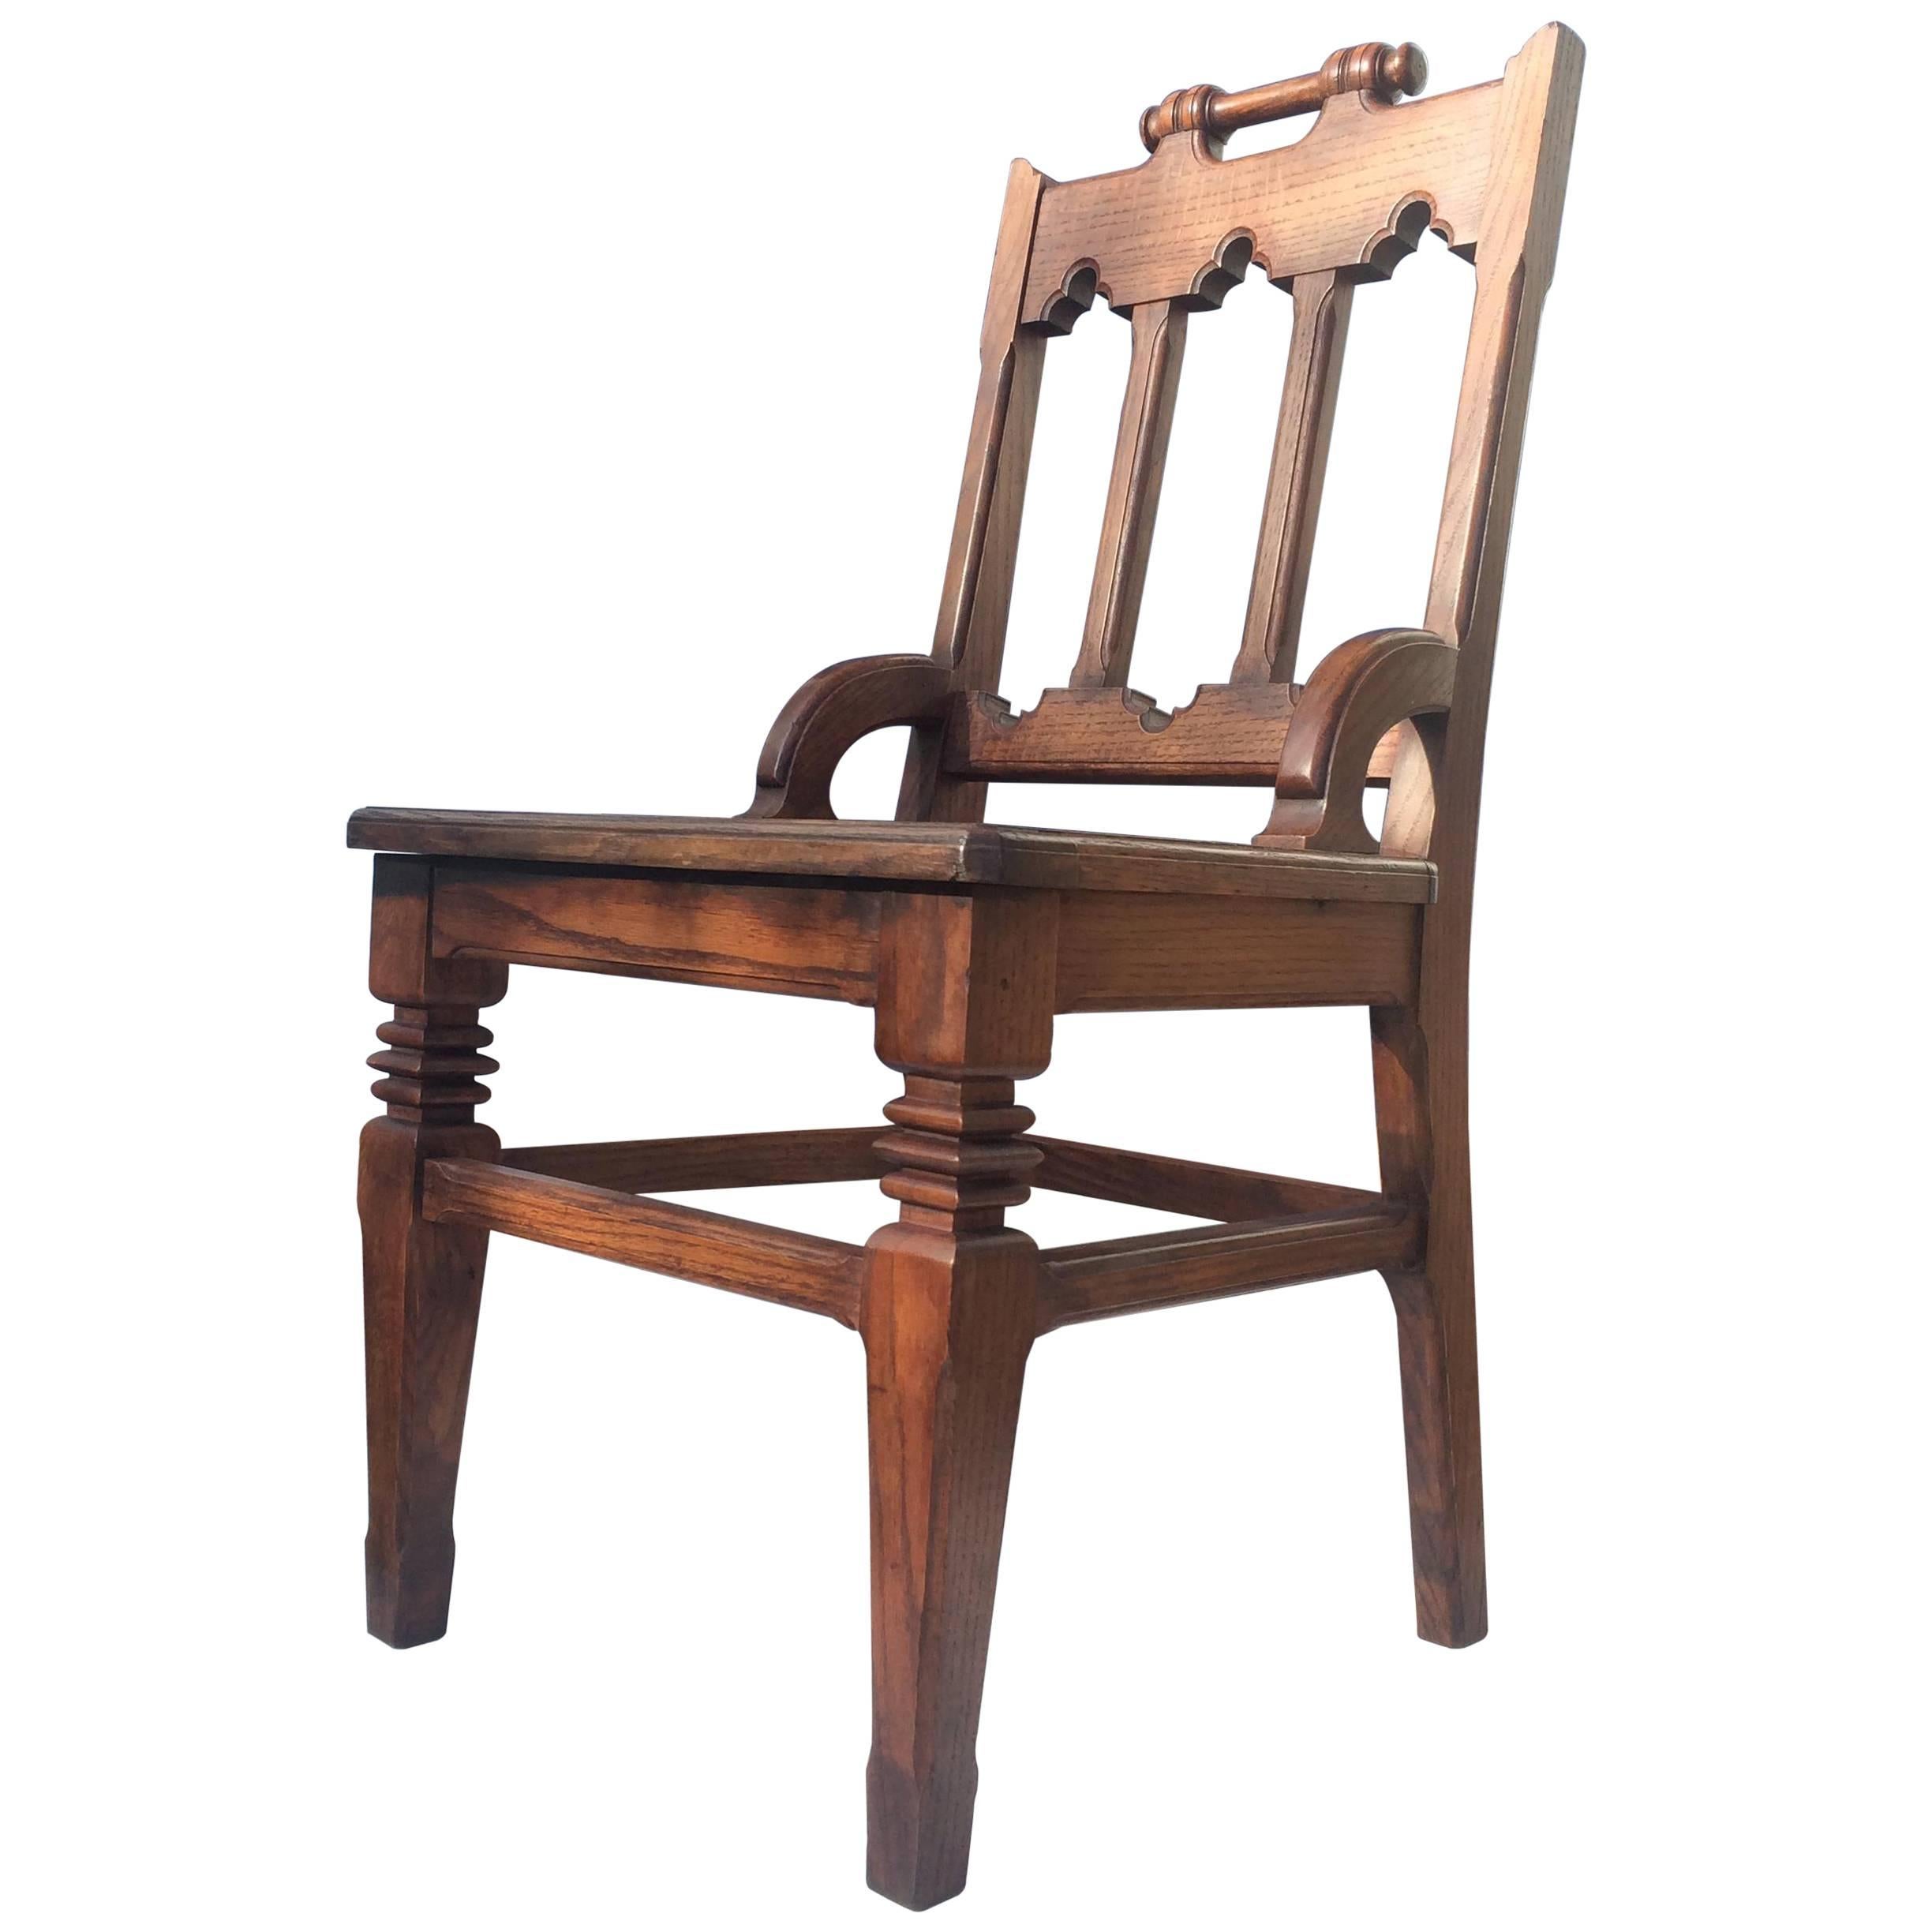 An early 20th Century English oak hall chair with Arts & Crafts and Gothic Style qualities. Handle back, carved graphic front legs. Excellent restored condition. *Requires drop in upholstered seat.